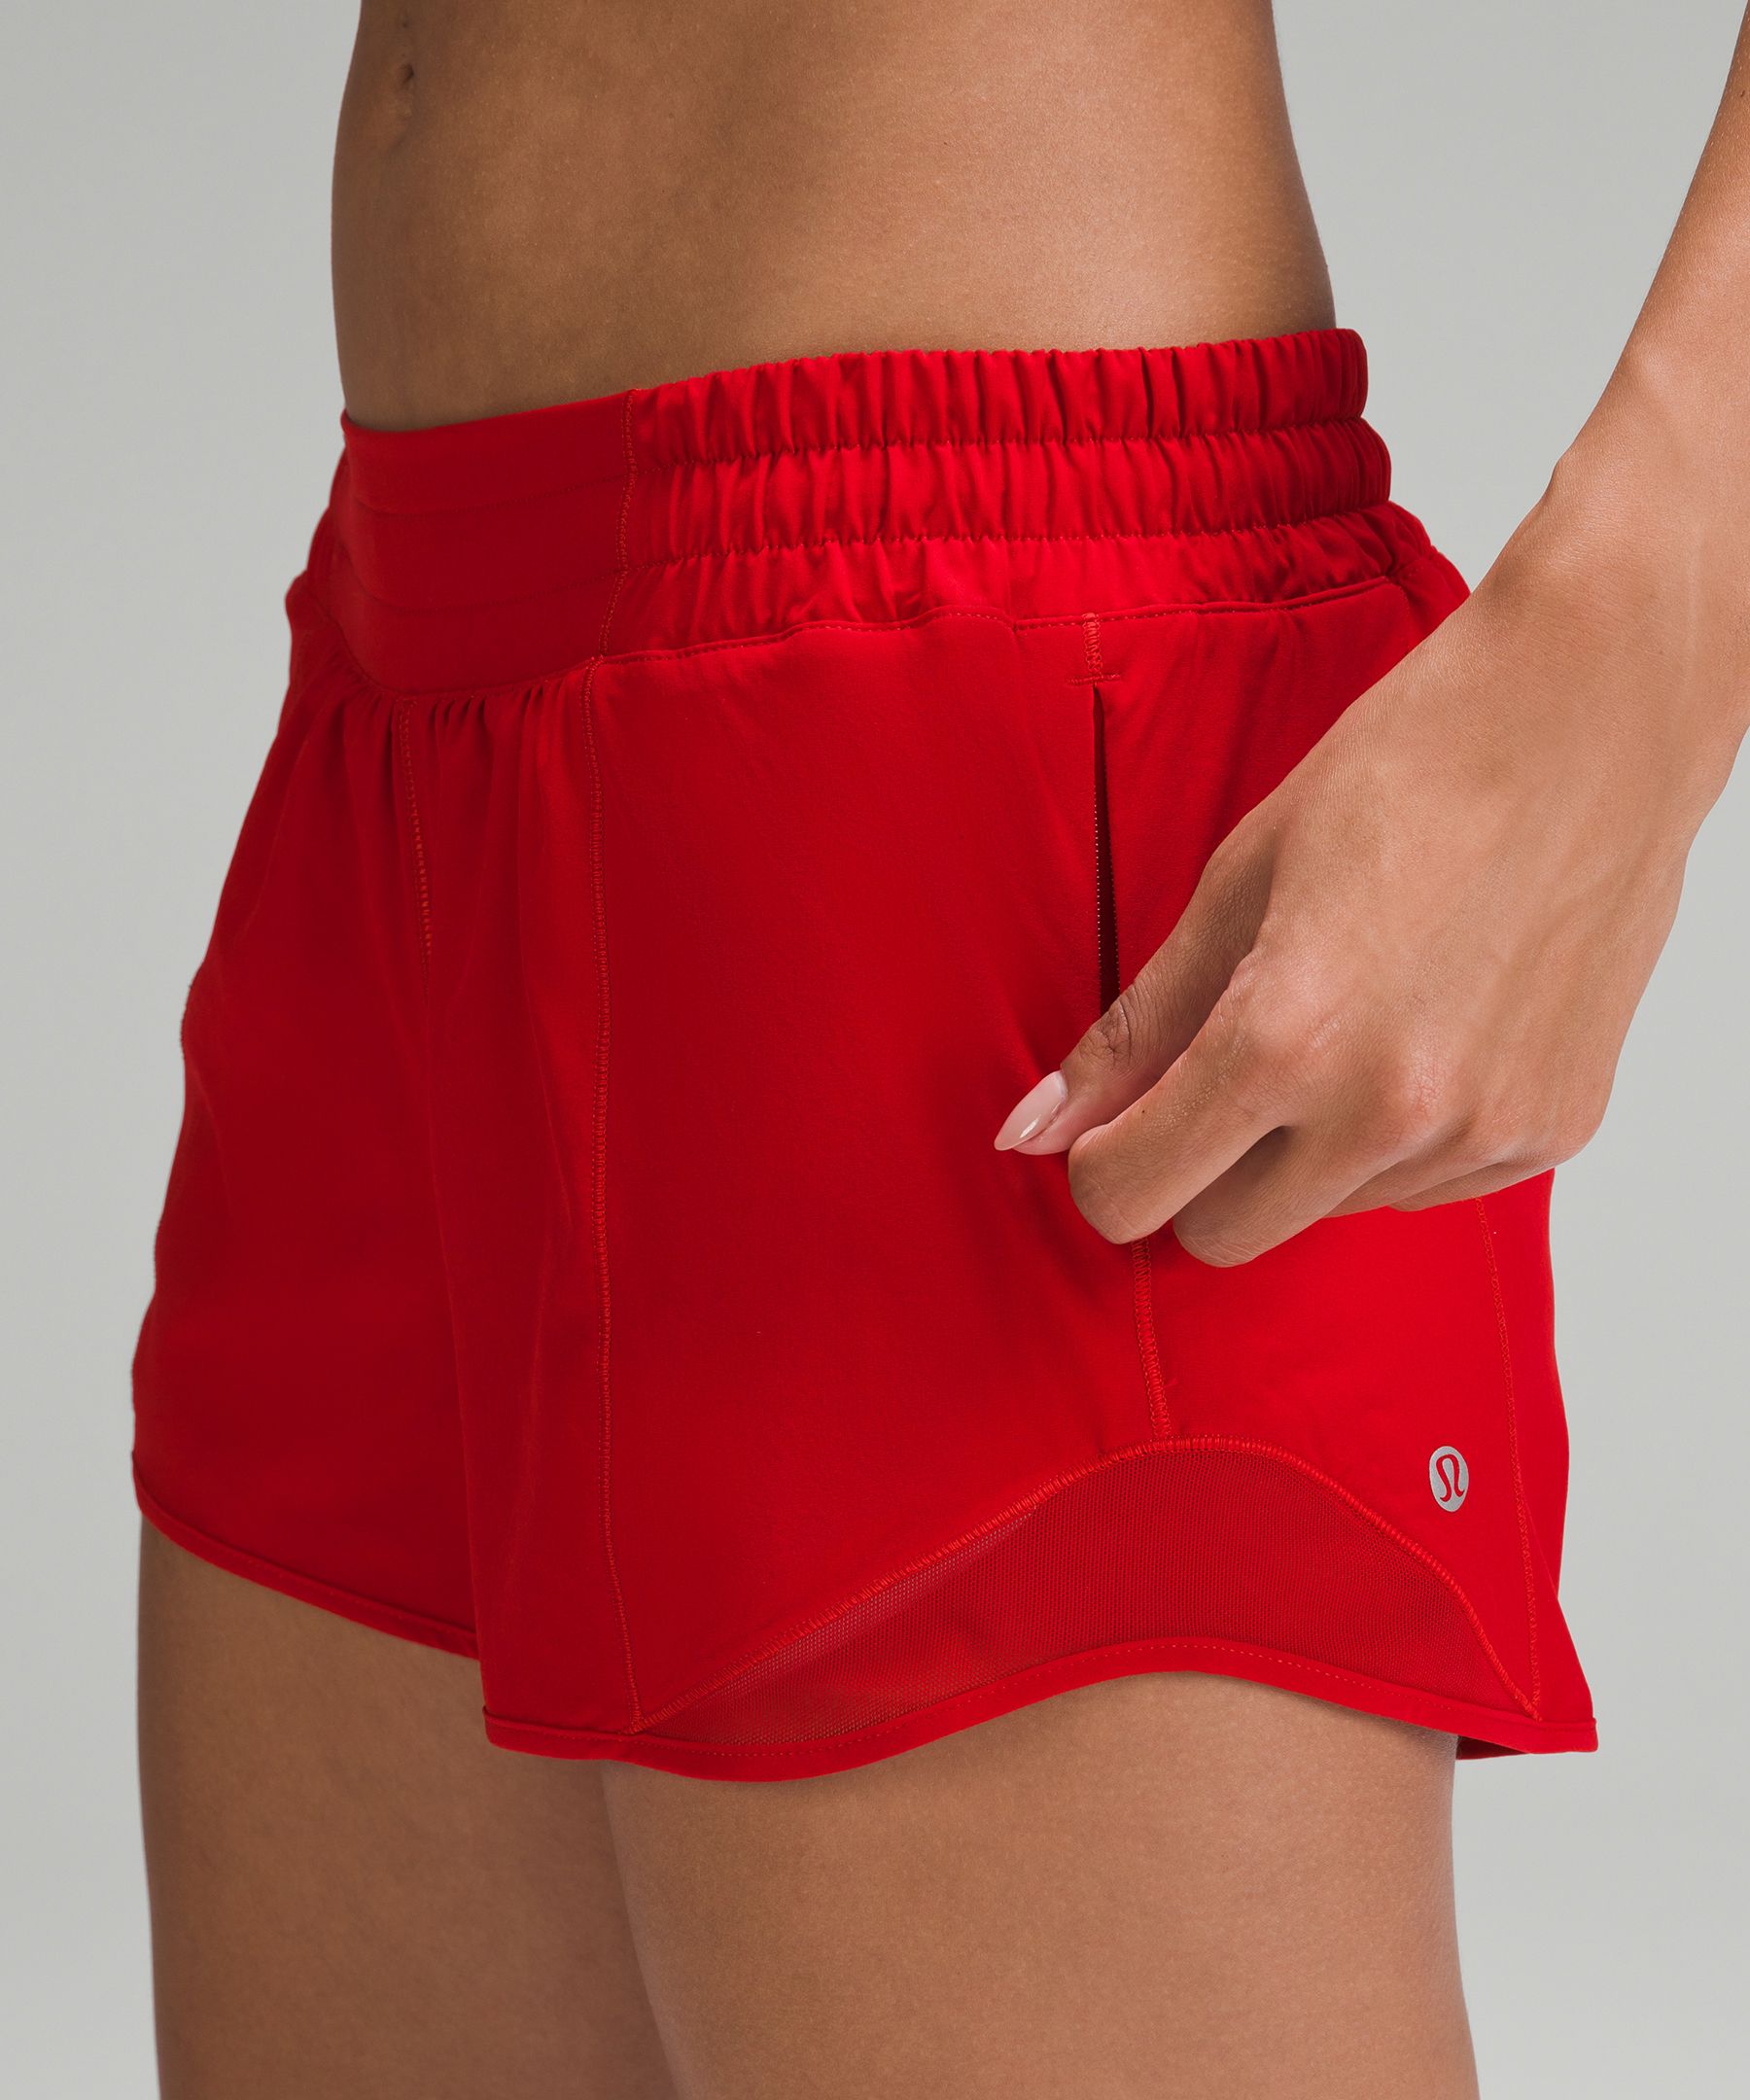 Hotty Hot Low-Rise Lined Short 4, Women's Shorts